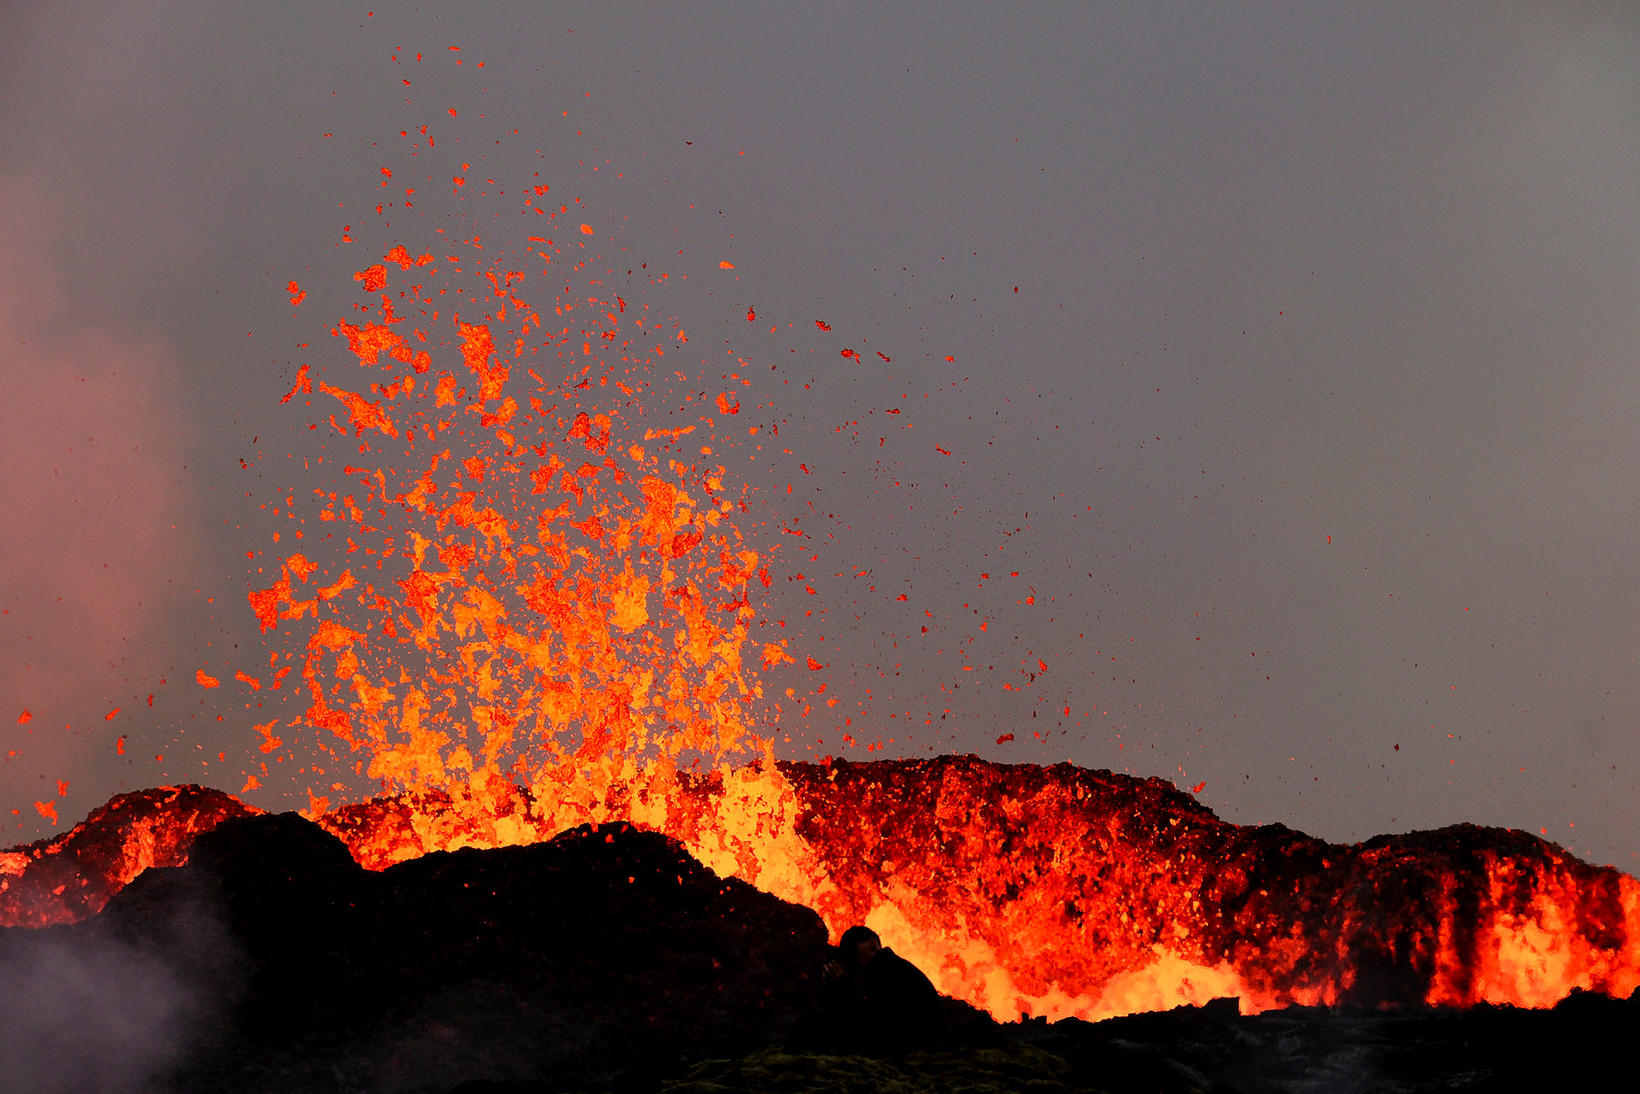 Many people go to the eruption site, but scientists think …